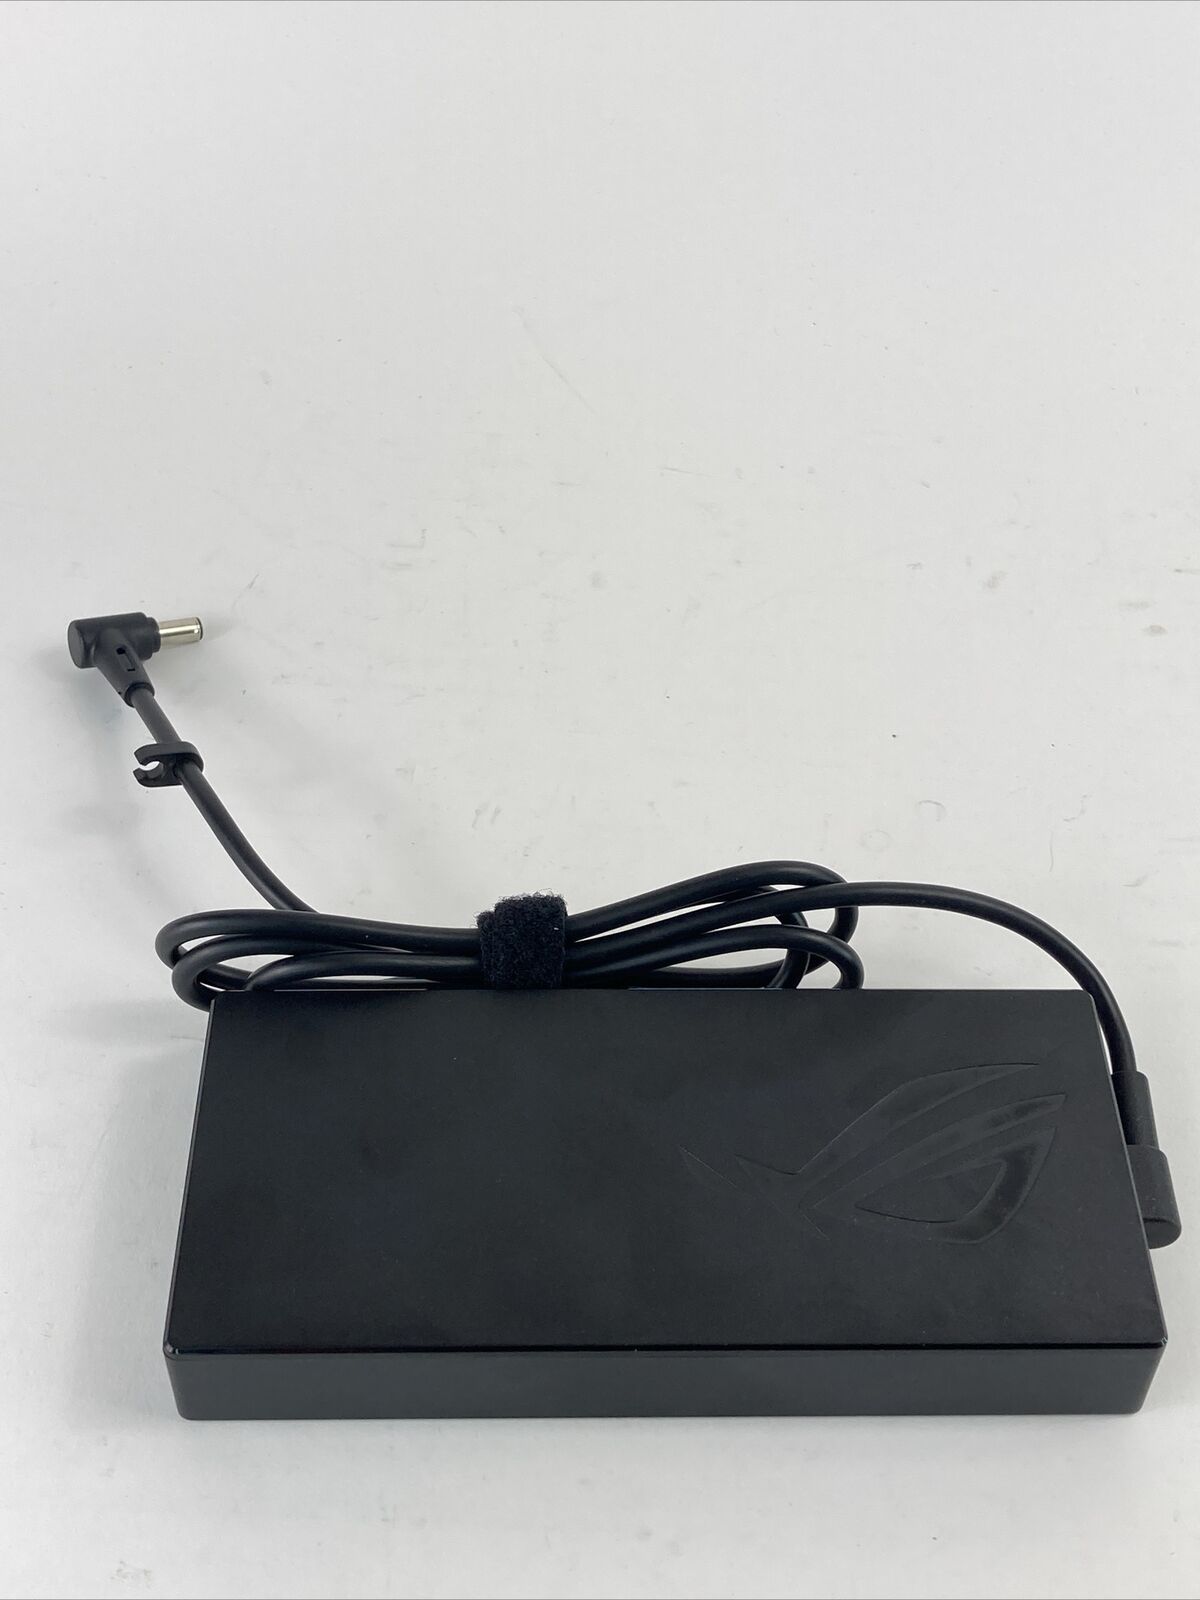 OEM Asus 280W 20V 14A ADP-280EB B AC Adapter Charger for ASUS ROG Strix G614JV